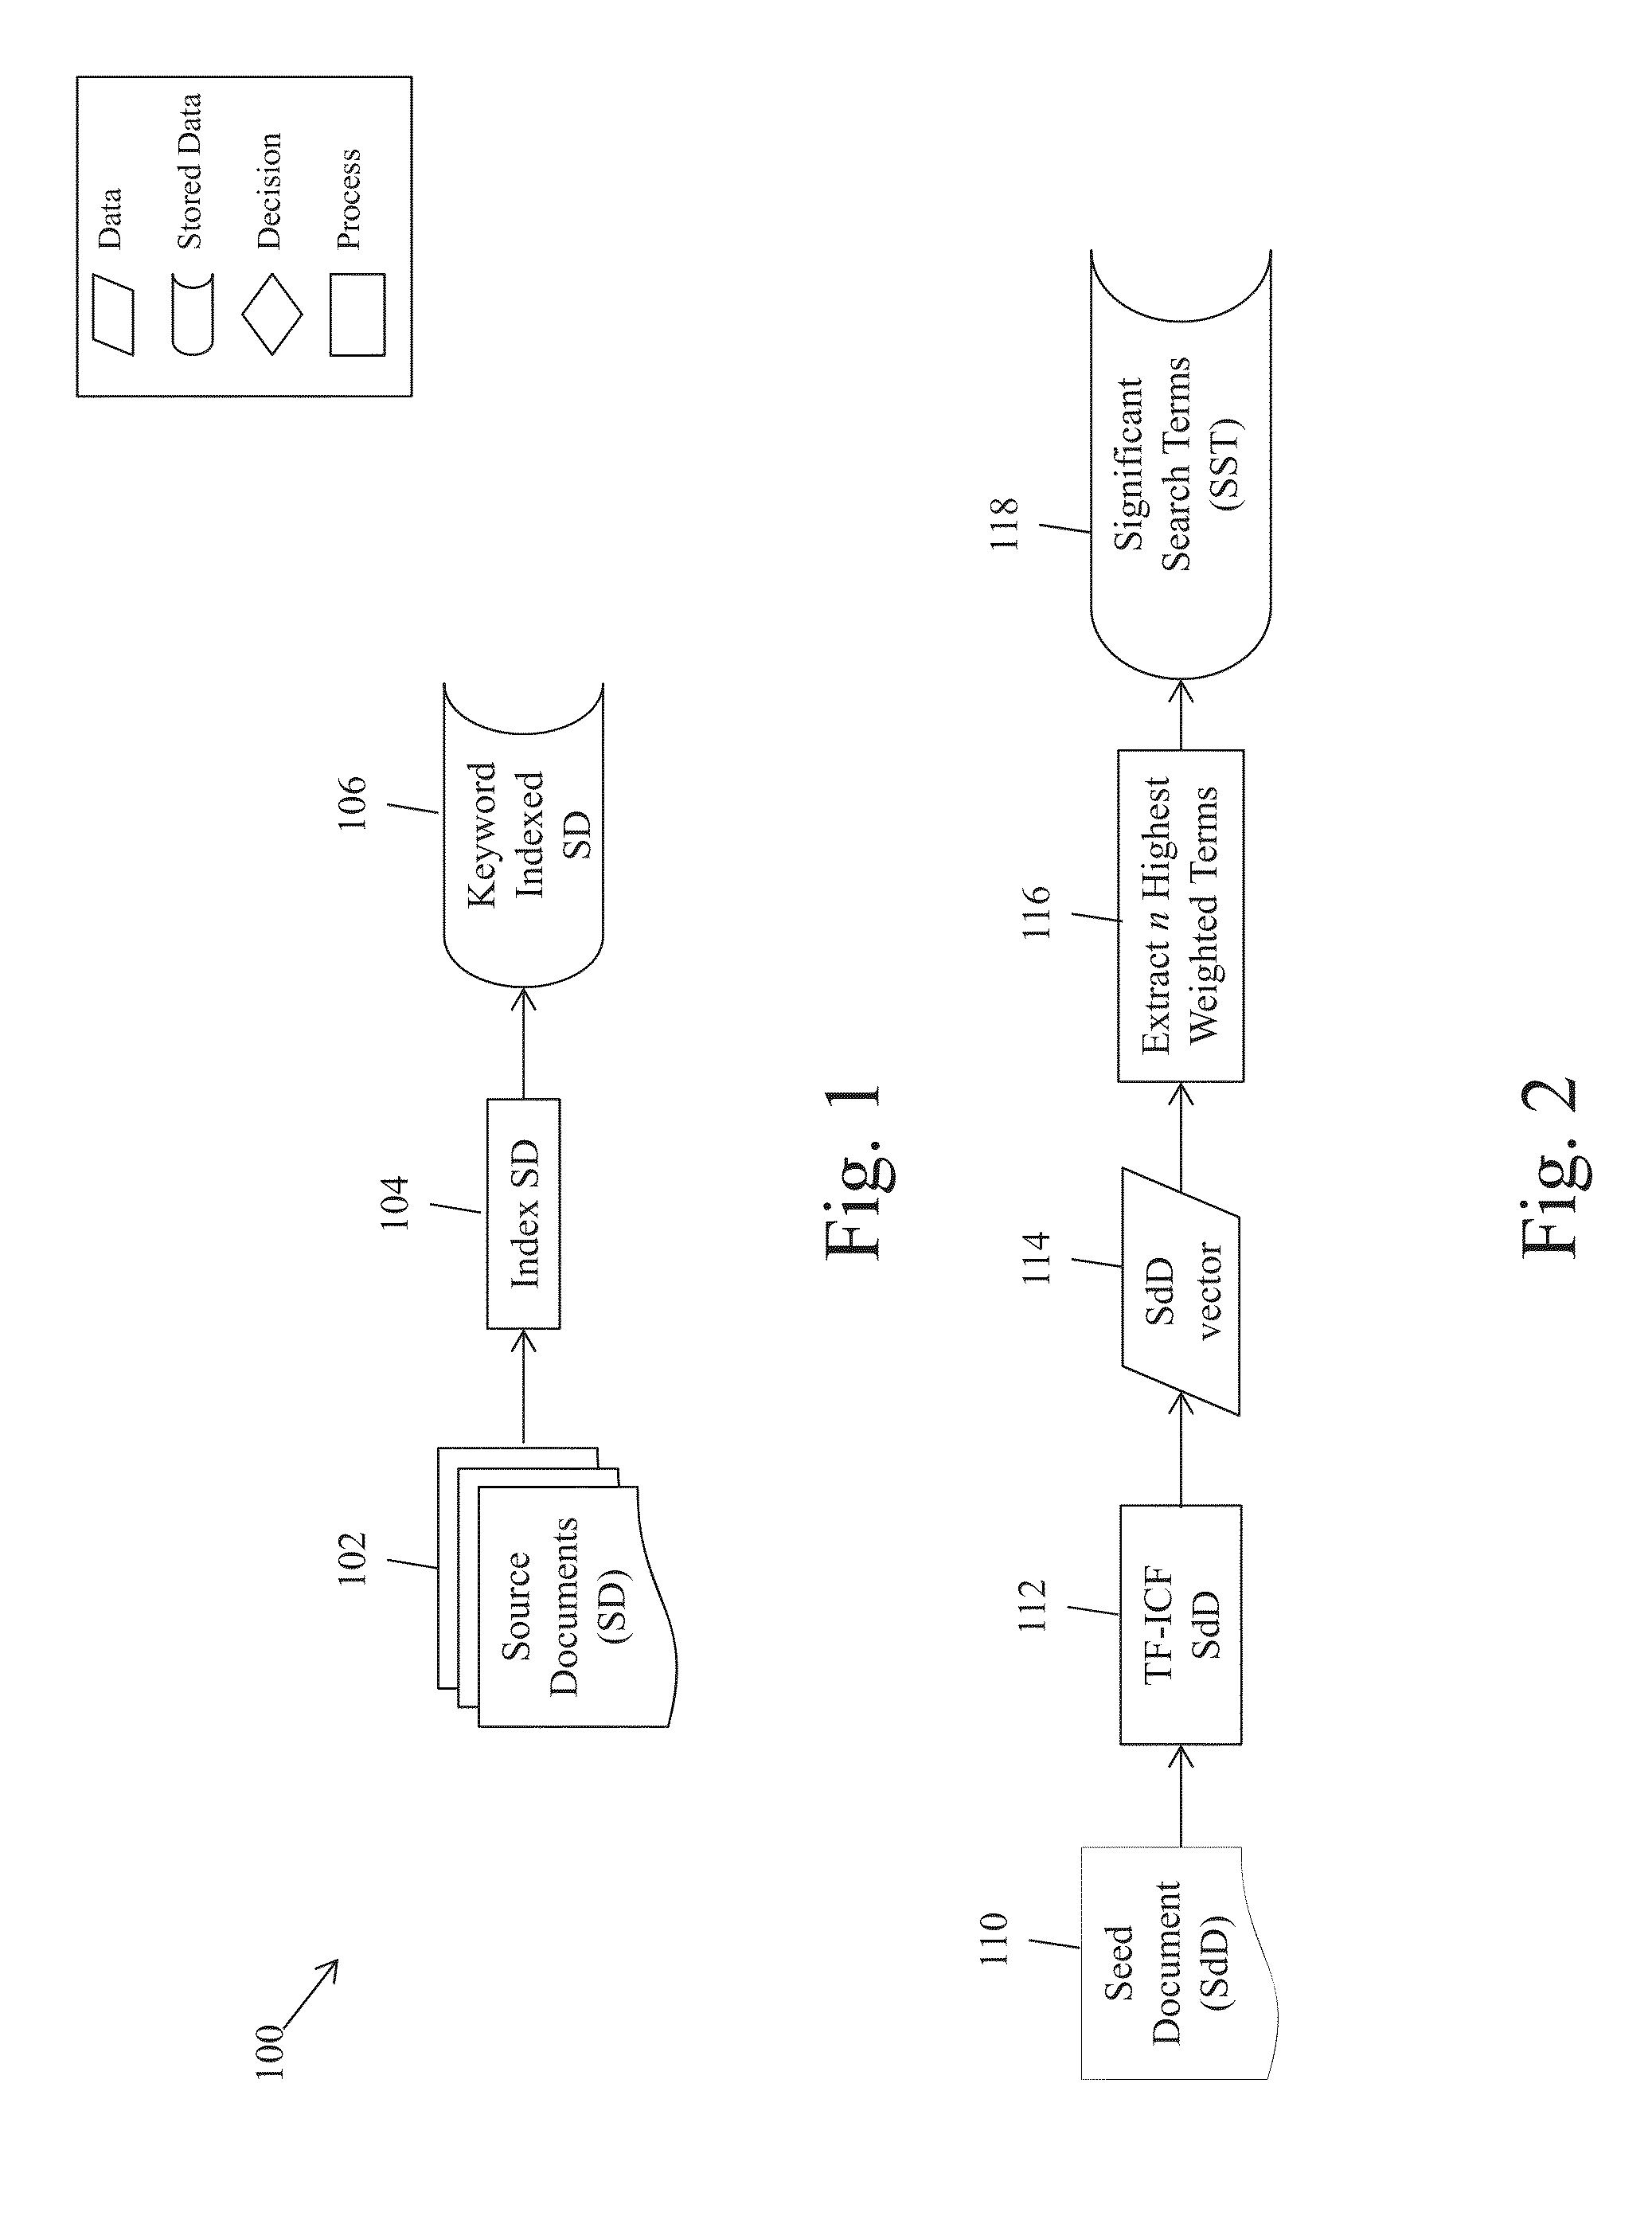 Method and system of filtering and recommending documents